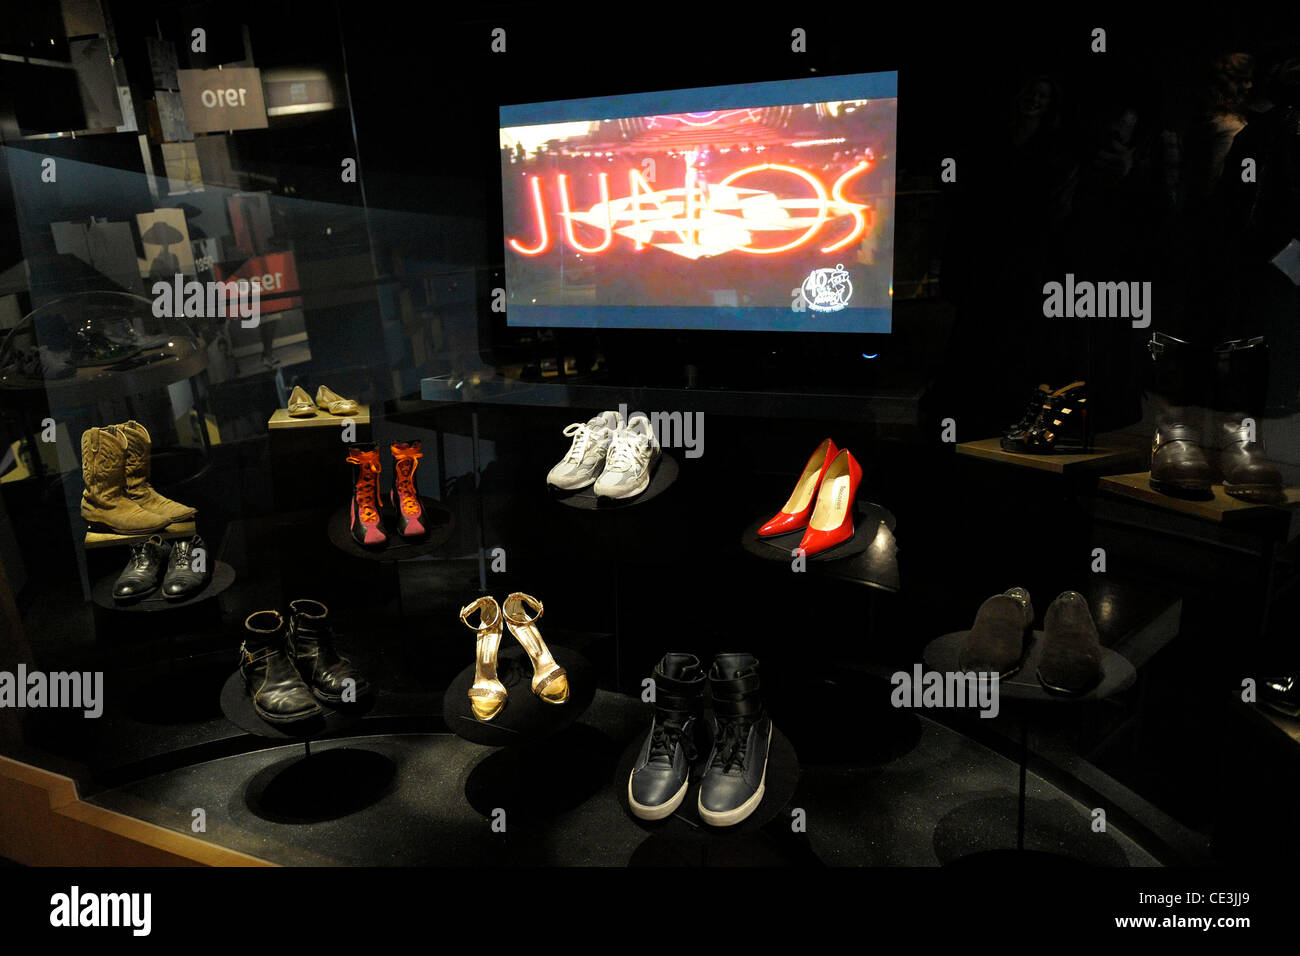 Shoes Display  Media preview of JUNO Sole: Celebrating 40 Years of the JUNO Awards'  at the Bata Shoe Museum.  Toronto, Canada - 09.11.10 Stock Photo